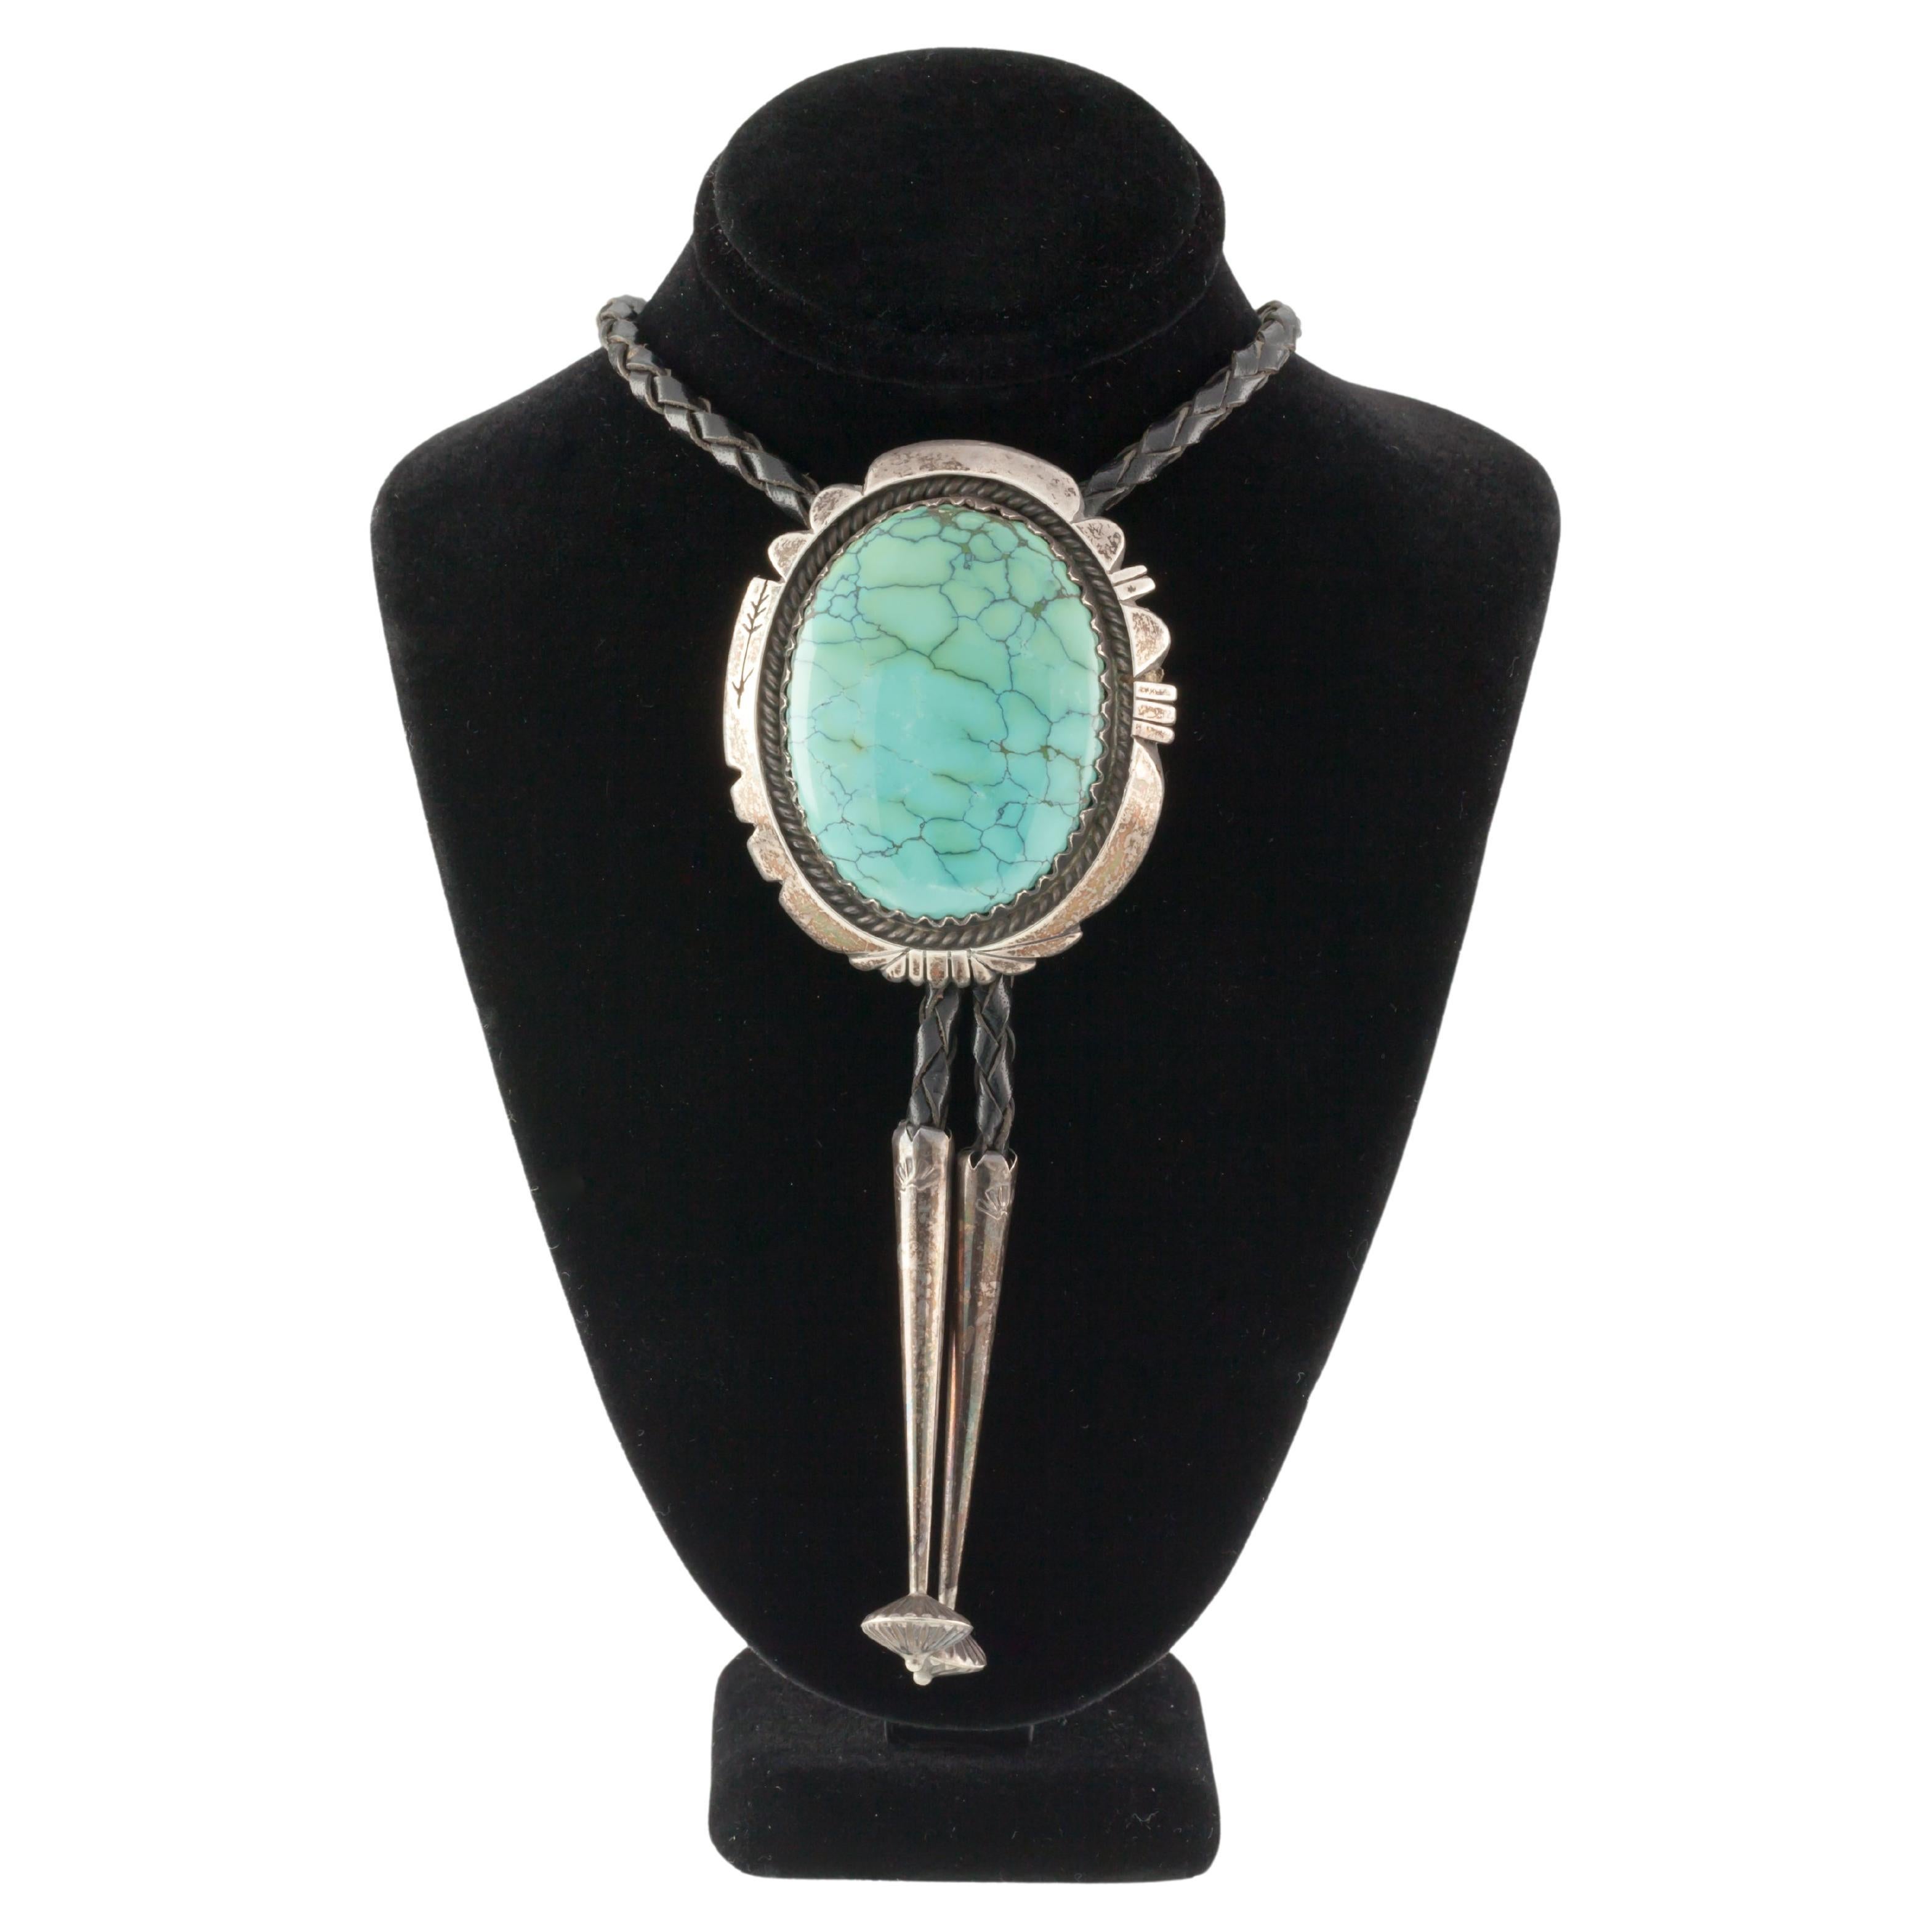 Vintage Navajo Turquoise & Sterling Silver Bolo Tie in Black Leather by Montoya